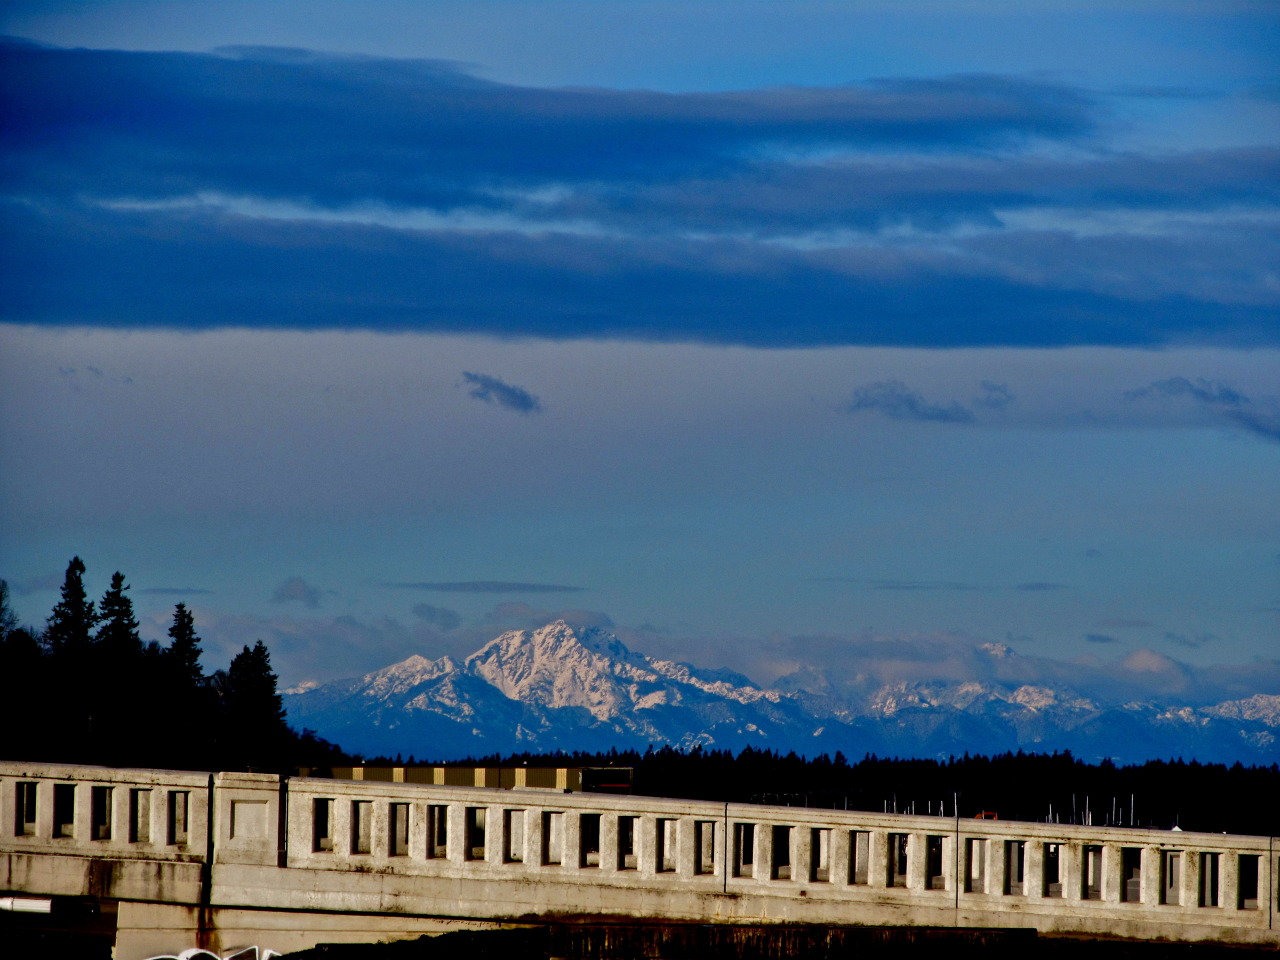 Olympia Mountains and the 4th Avenue Bridge